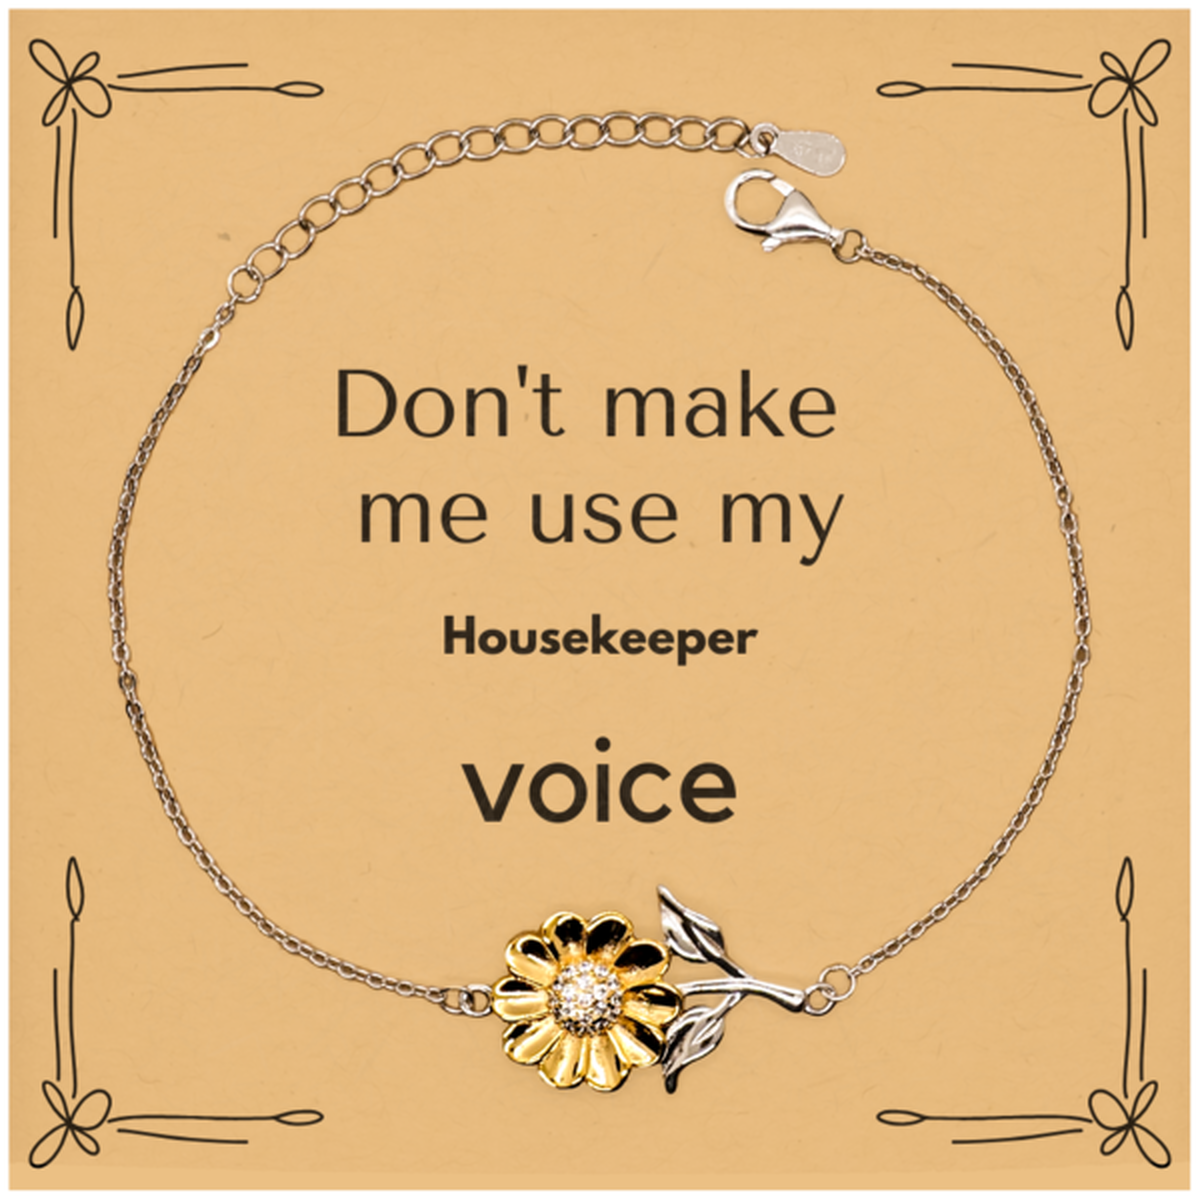 Don't make me use my Housekeeper voice, Sarcasm Housekeeper Card Gifts, Christmas Housekeeper Sunflower Bracelet Birthday Unique Gifts For Housekeeper Coworkers, Men, Women, Colleague, Friends